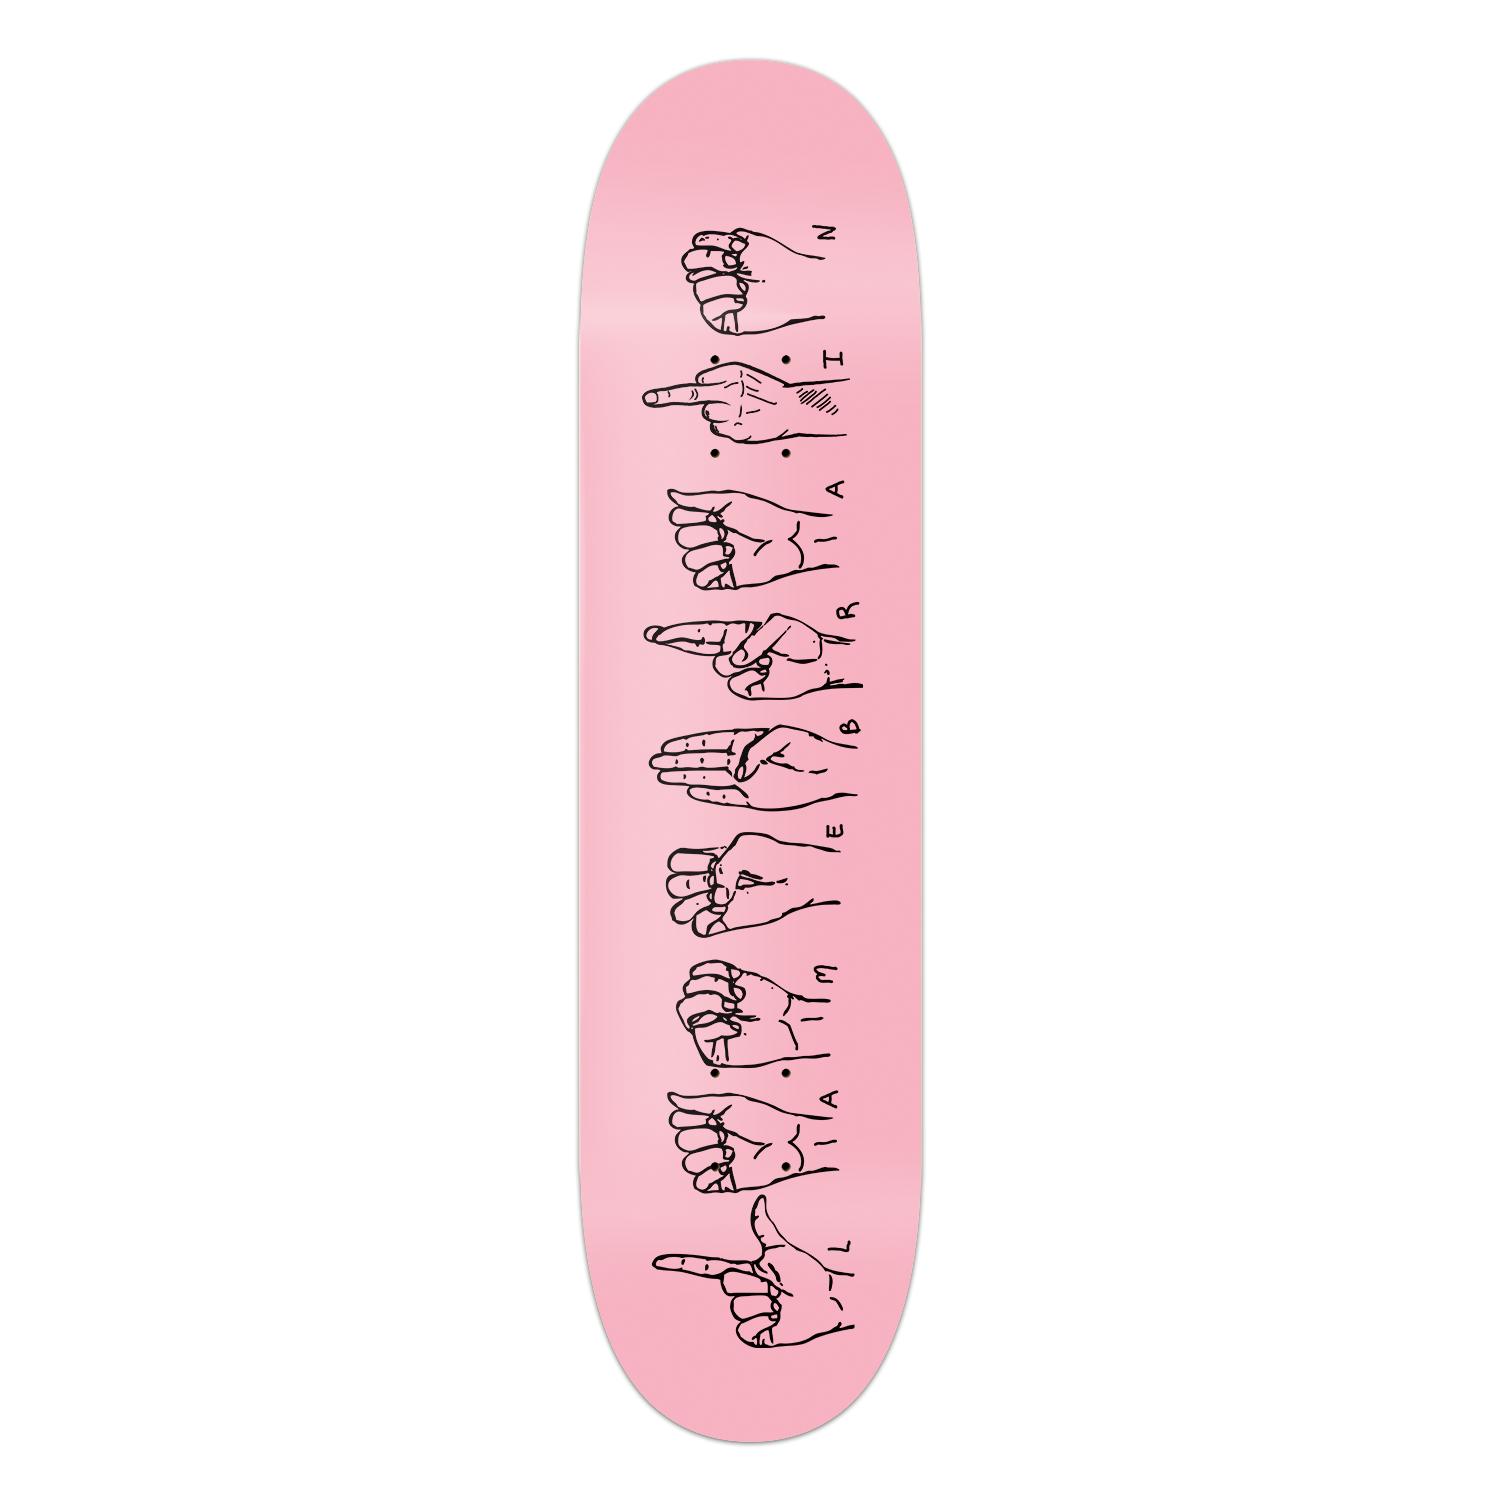 pink skateboard with sign language spelling out lamebrain. I is replaced with a middle finger